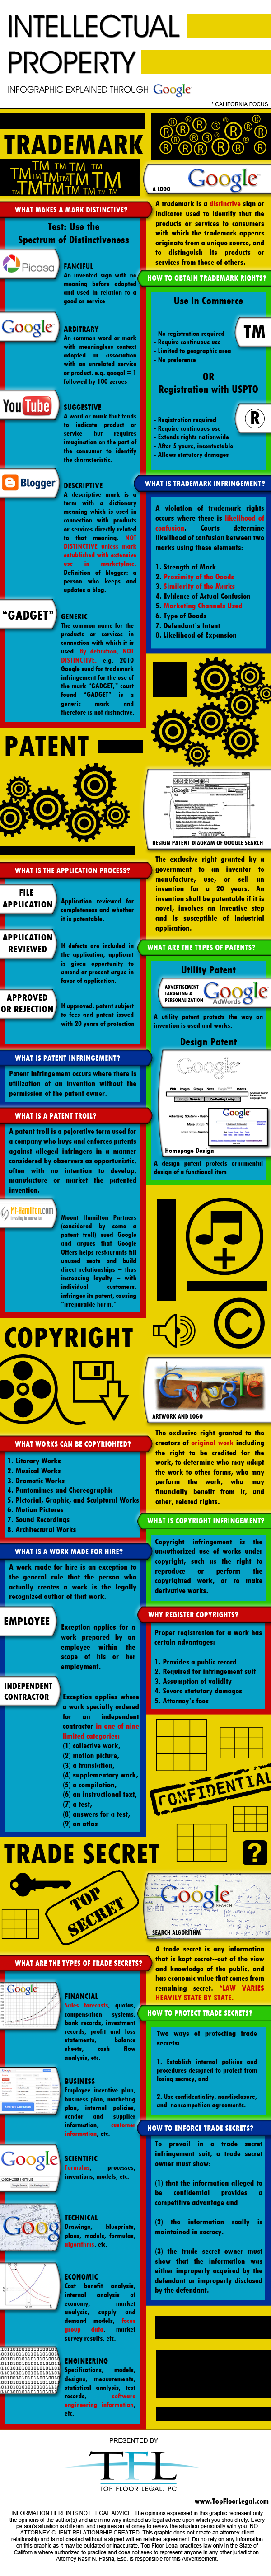 intellectual property explained via google infographic 